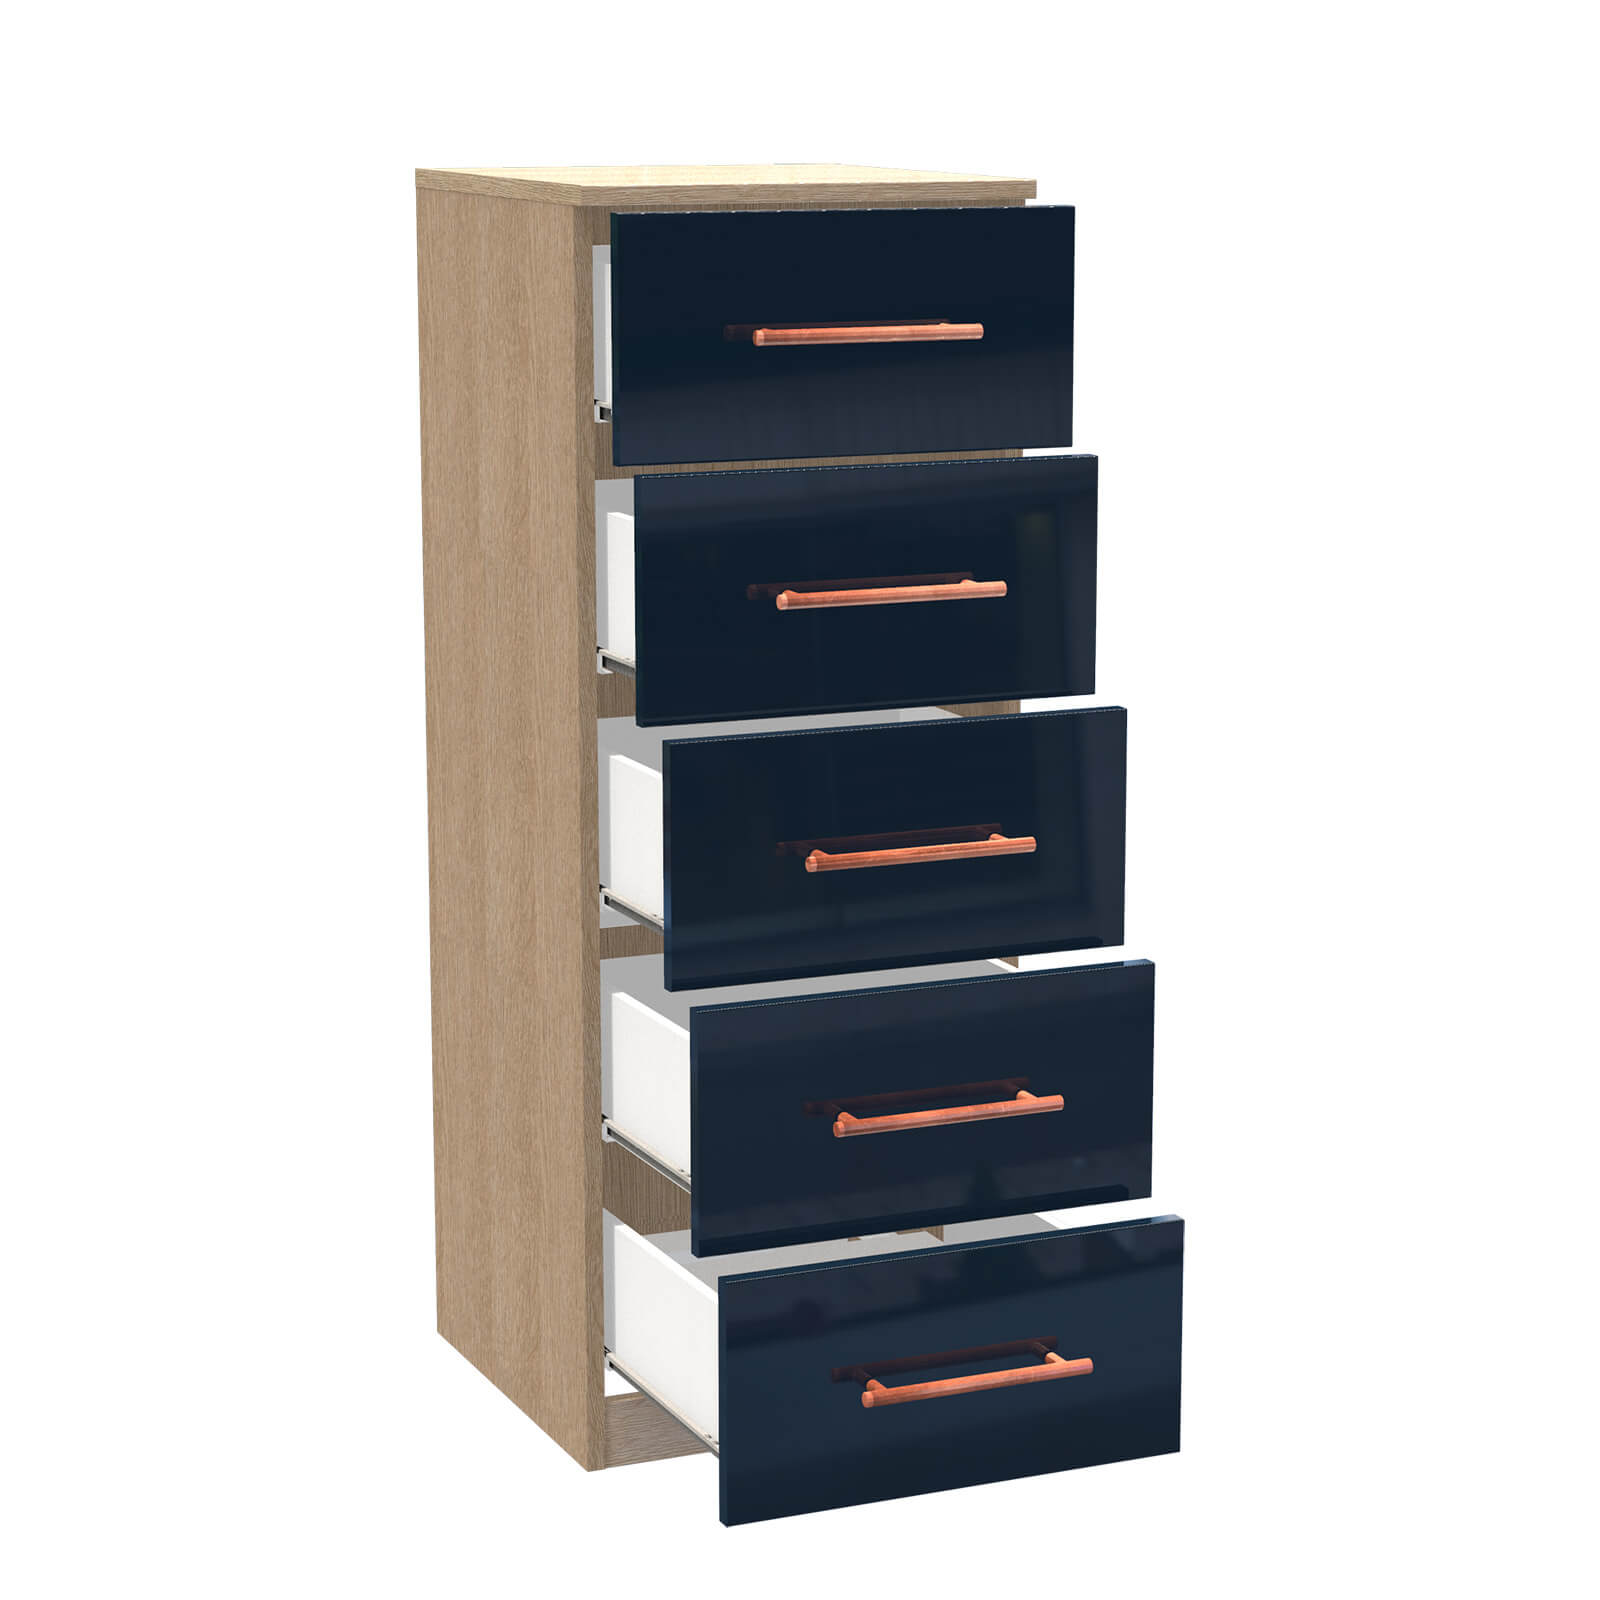 Fitted Bedroom Slab 5 Drawer Chest - Navy Blue